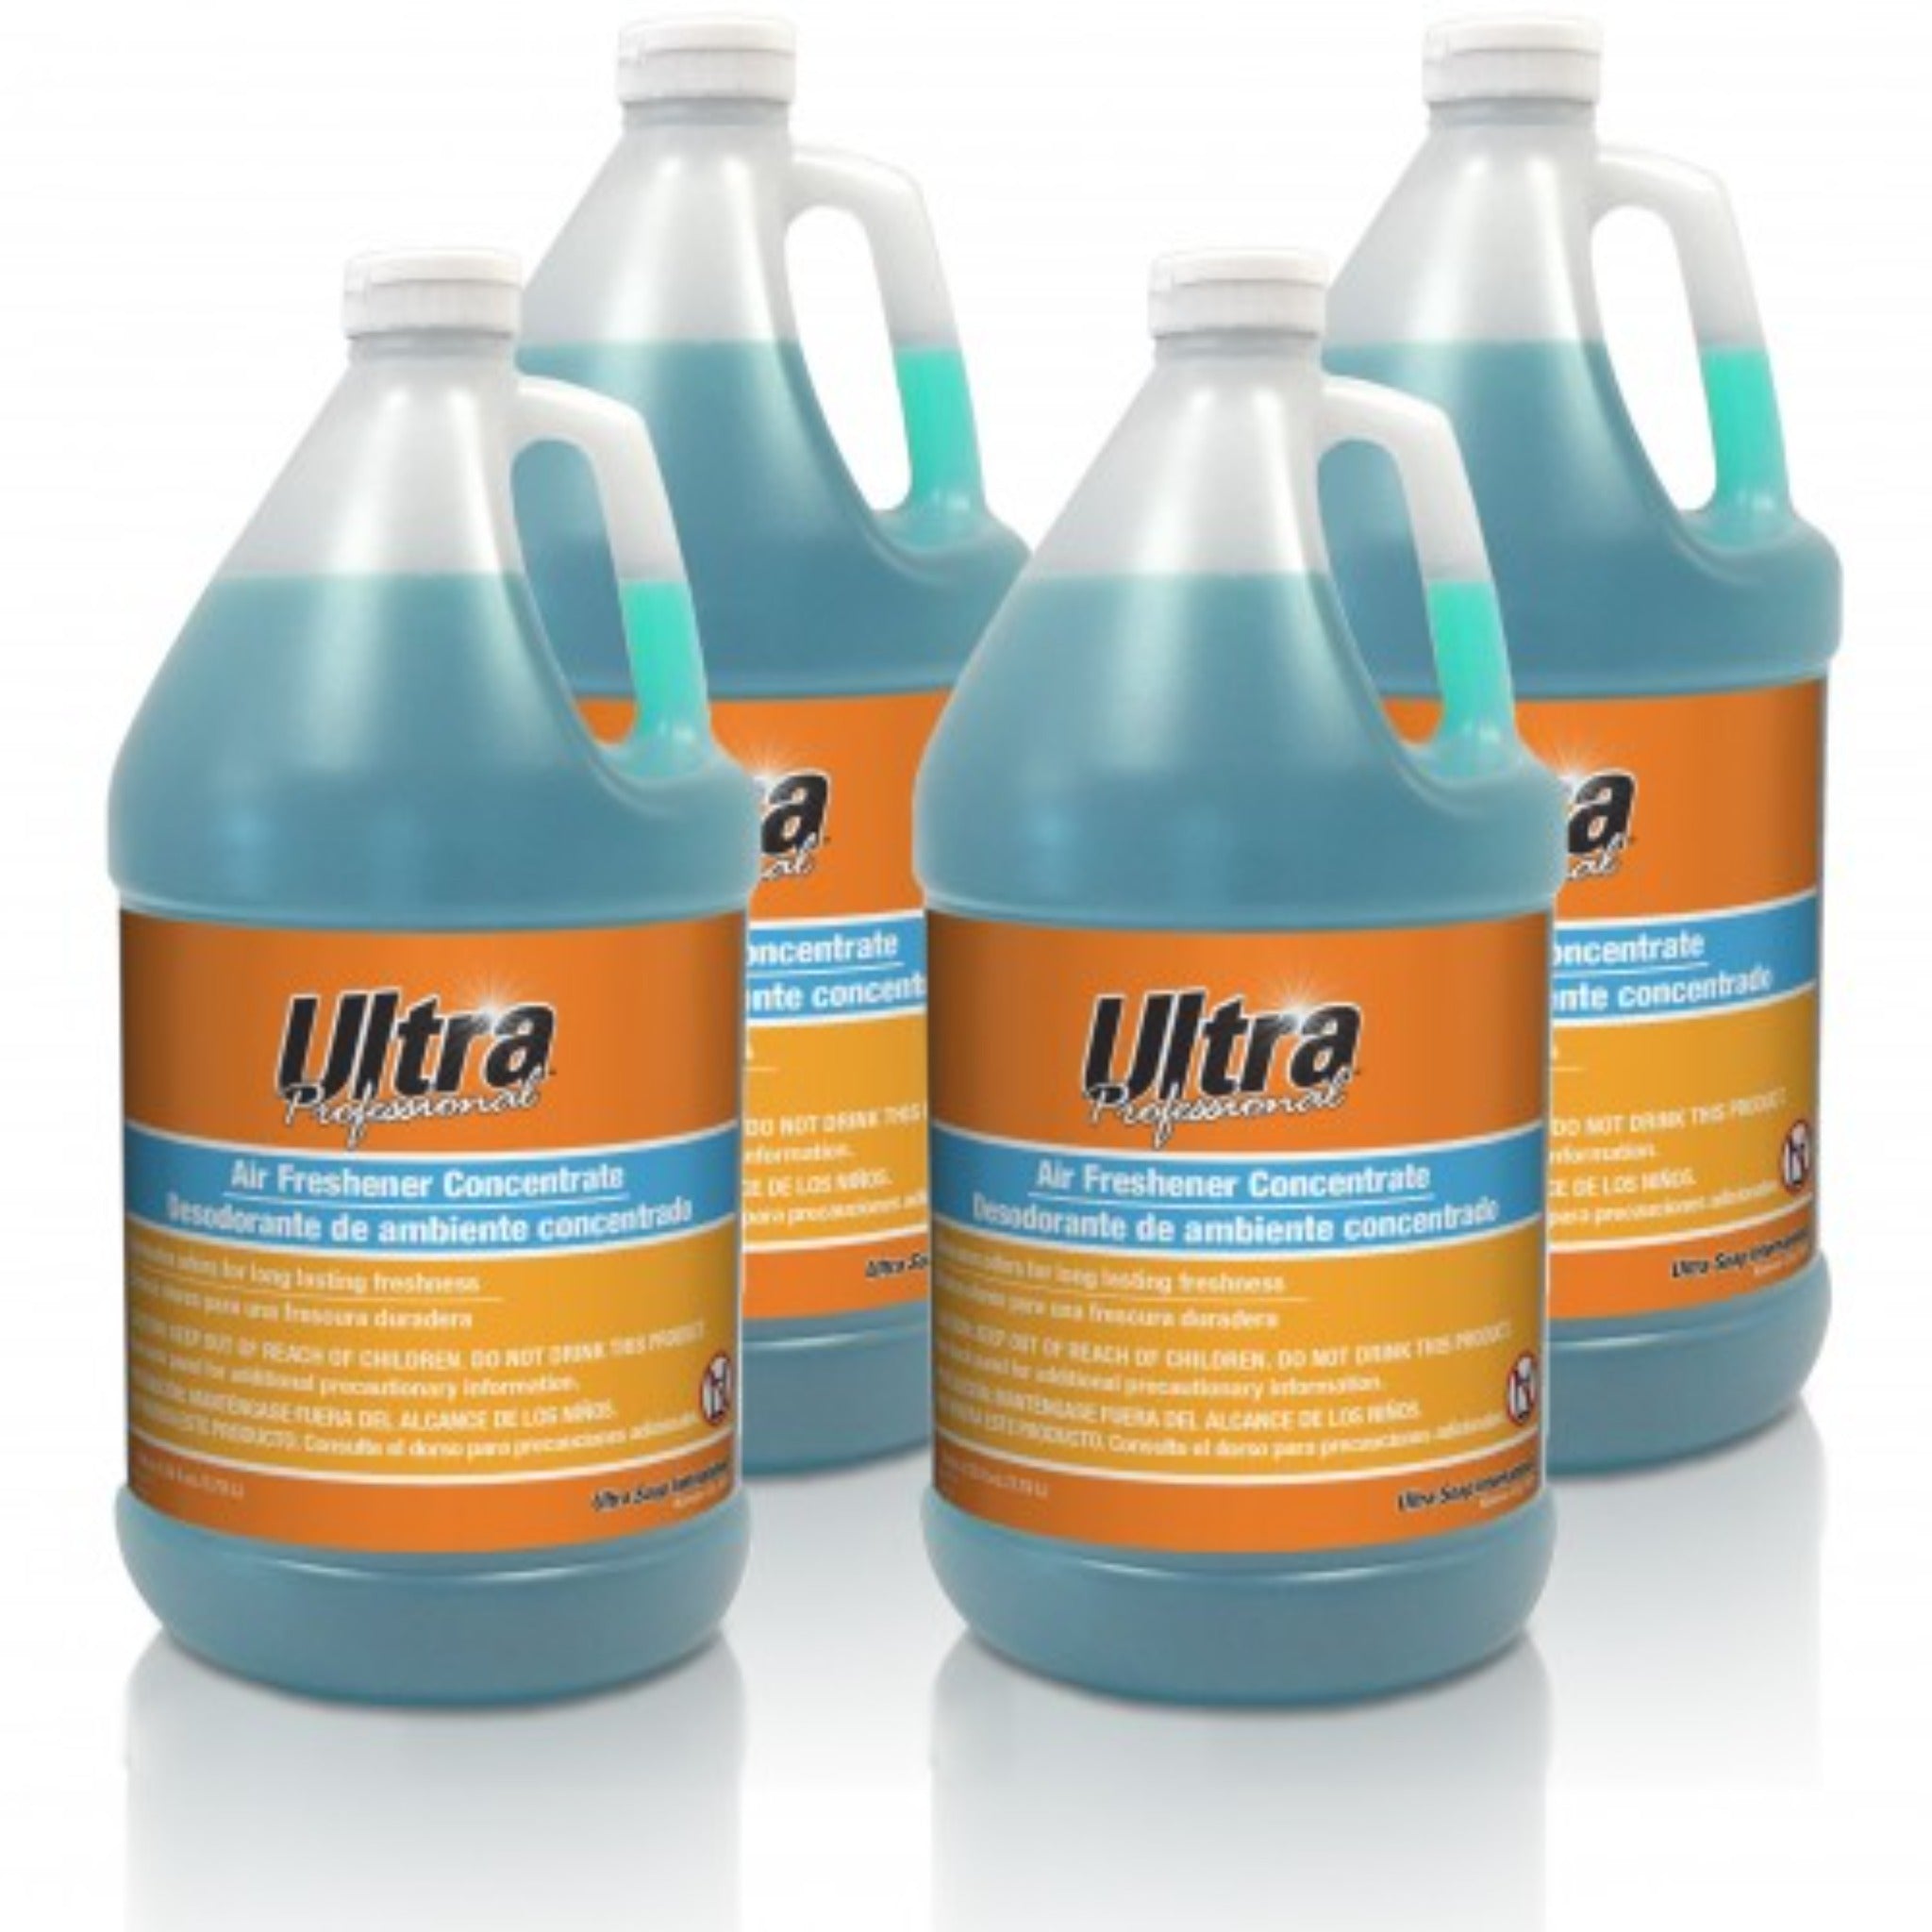 Ultra Professional Air Freshener Concentrate - 4x1 Gallon